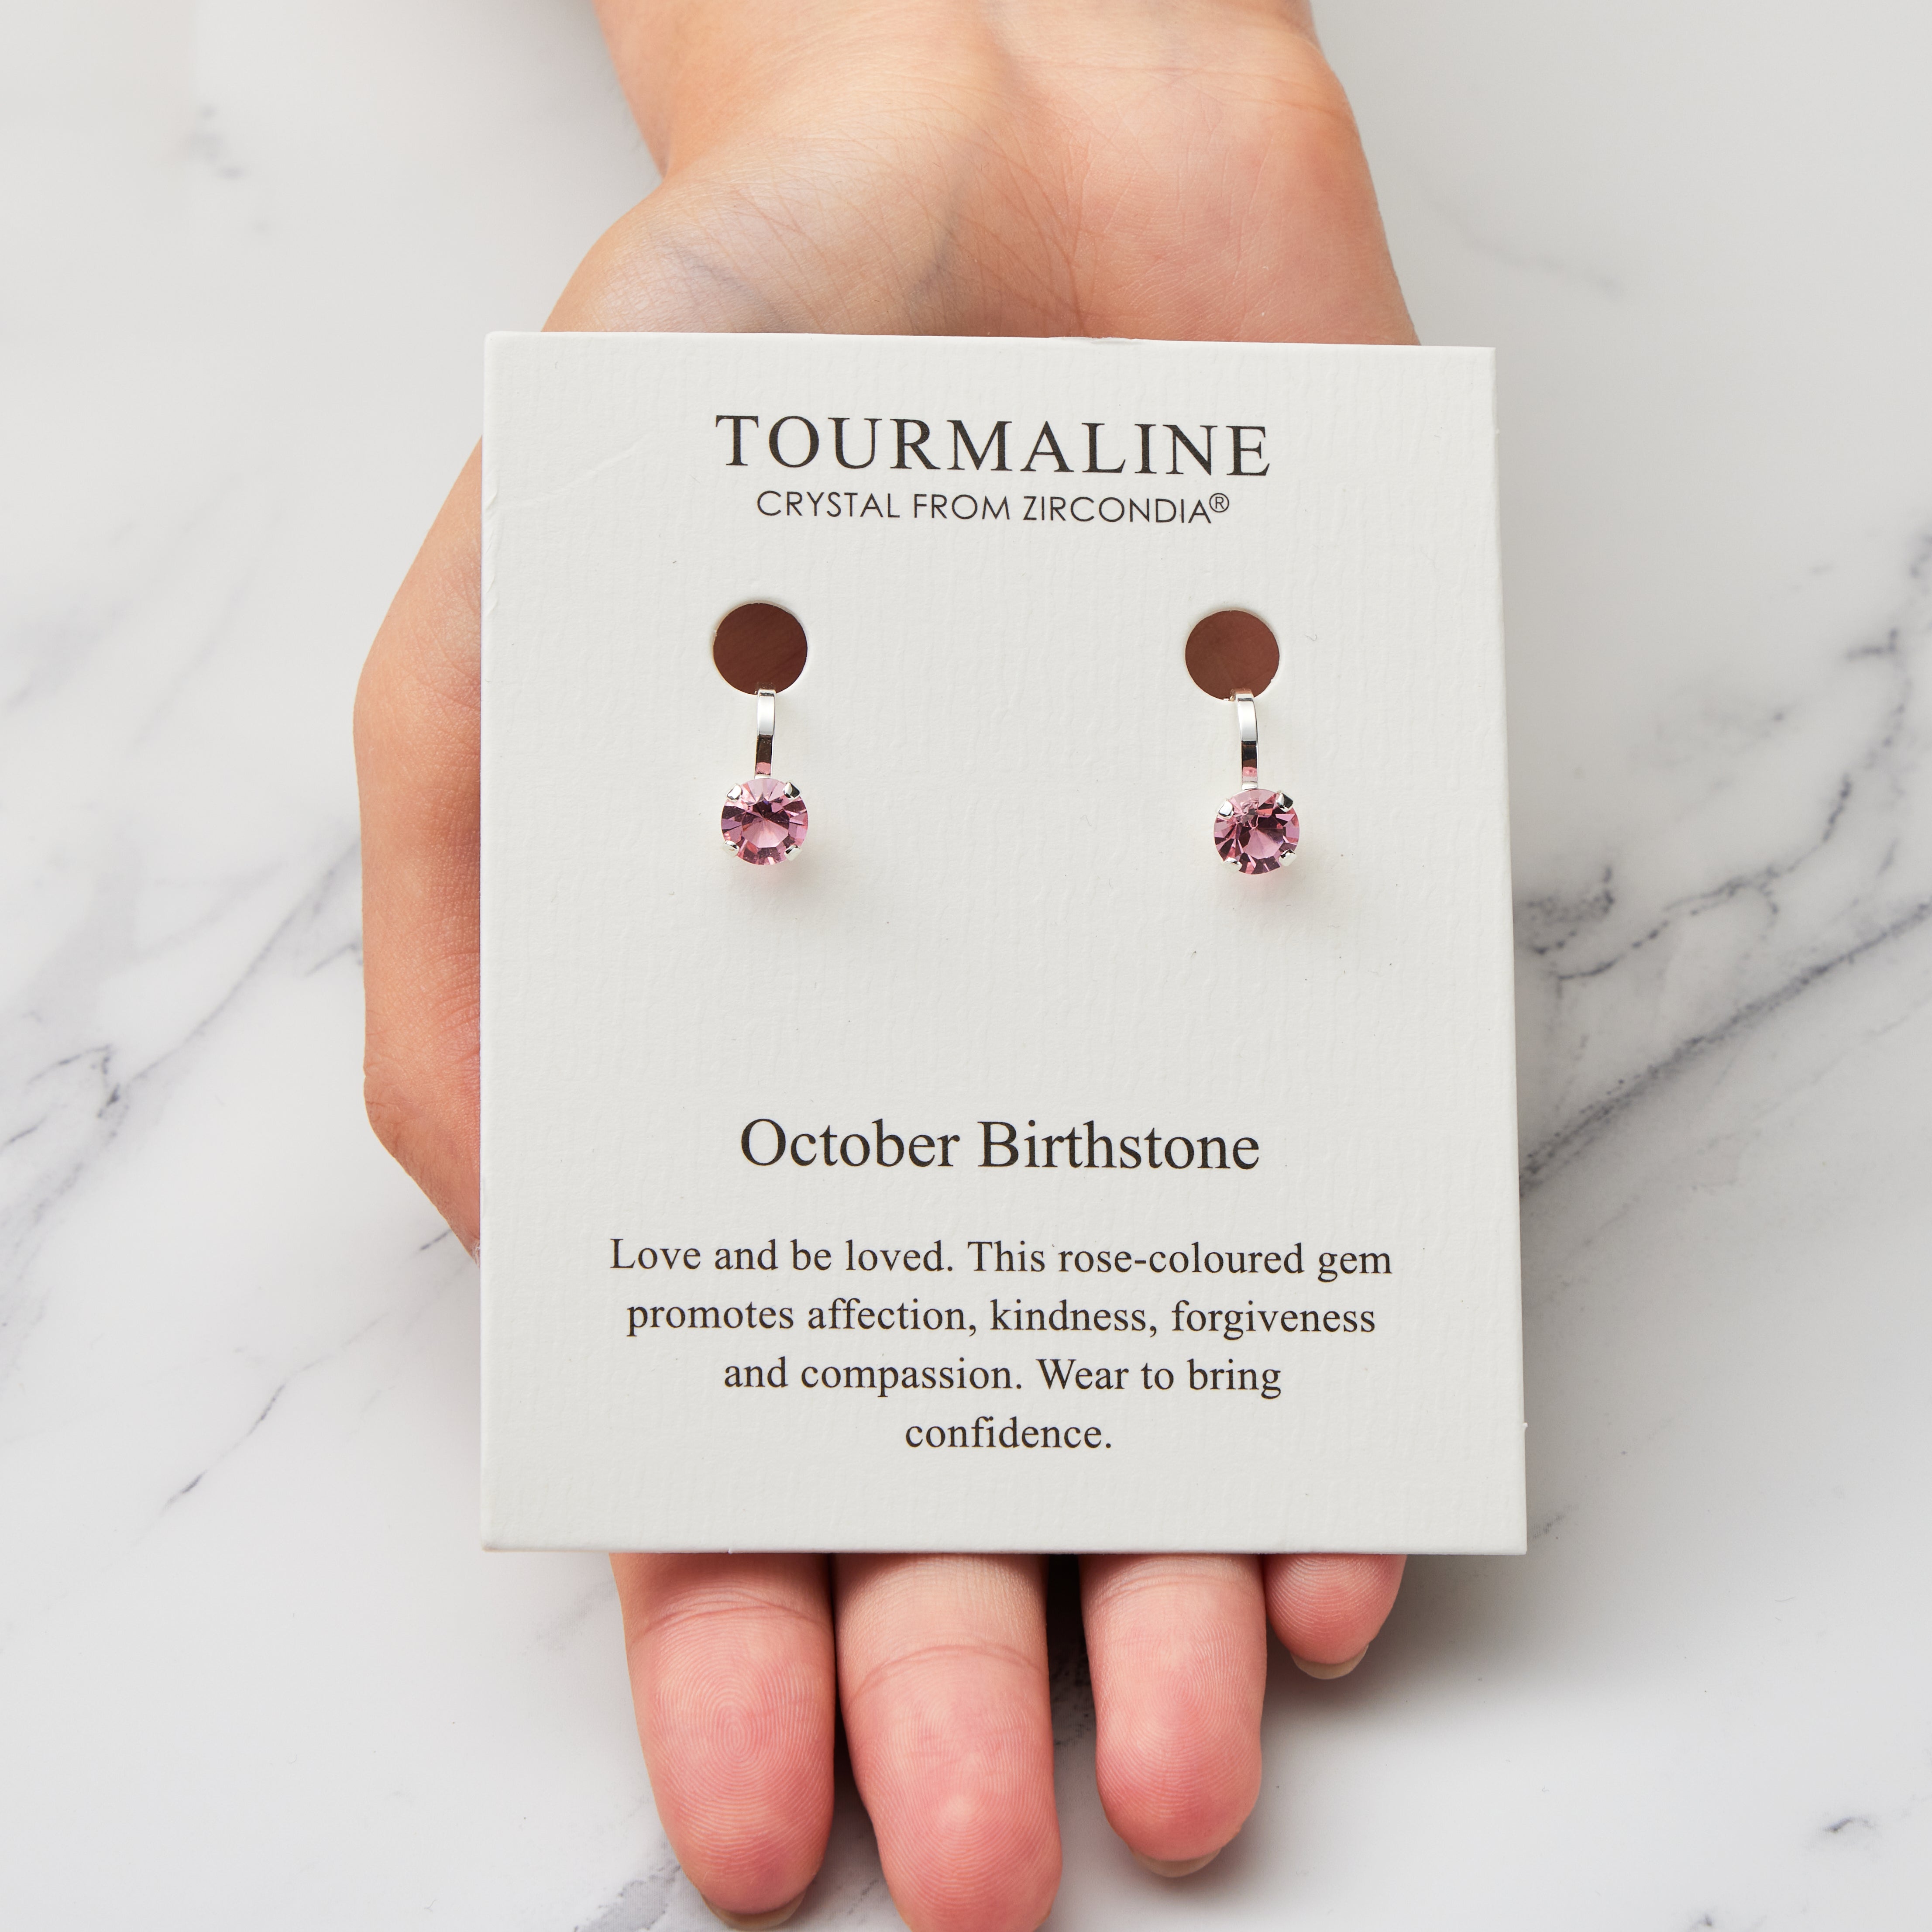 October (Tourmaline) Birthstone Clip On Earrings Created with Zircondia® Crystals